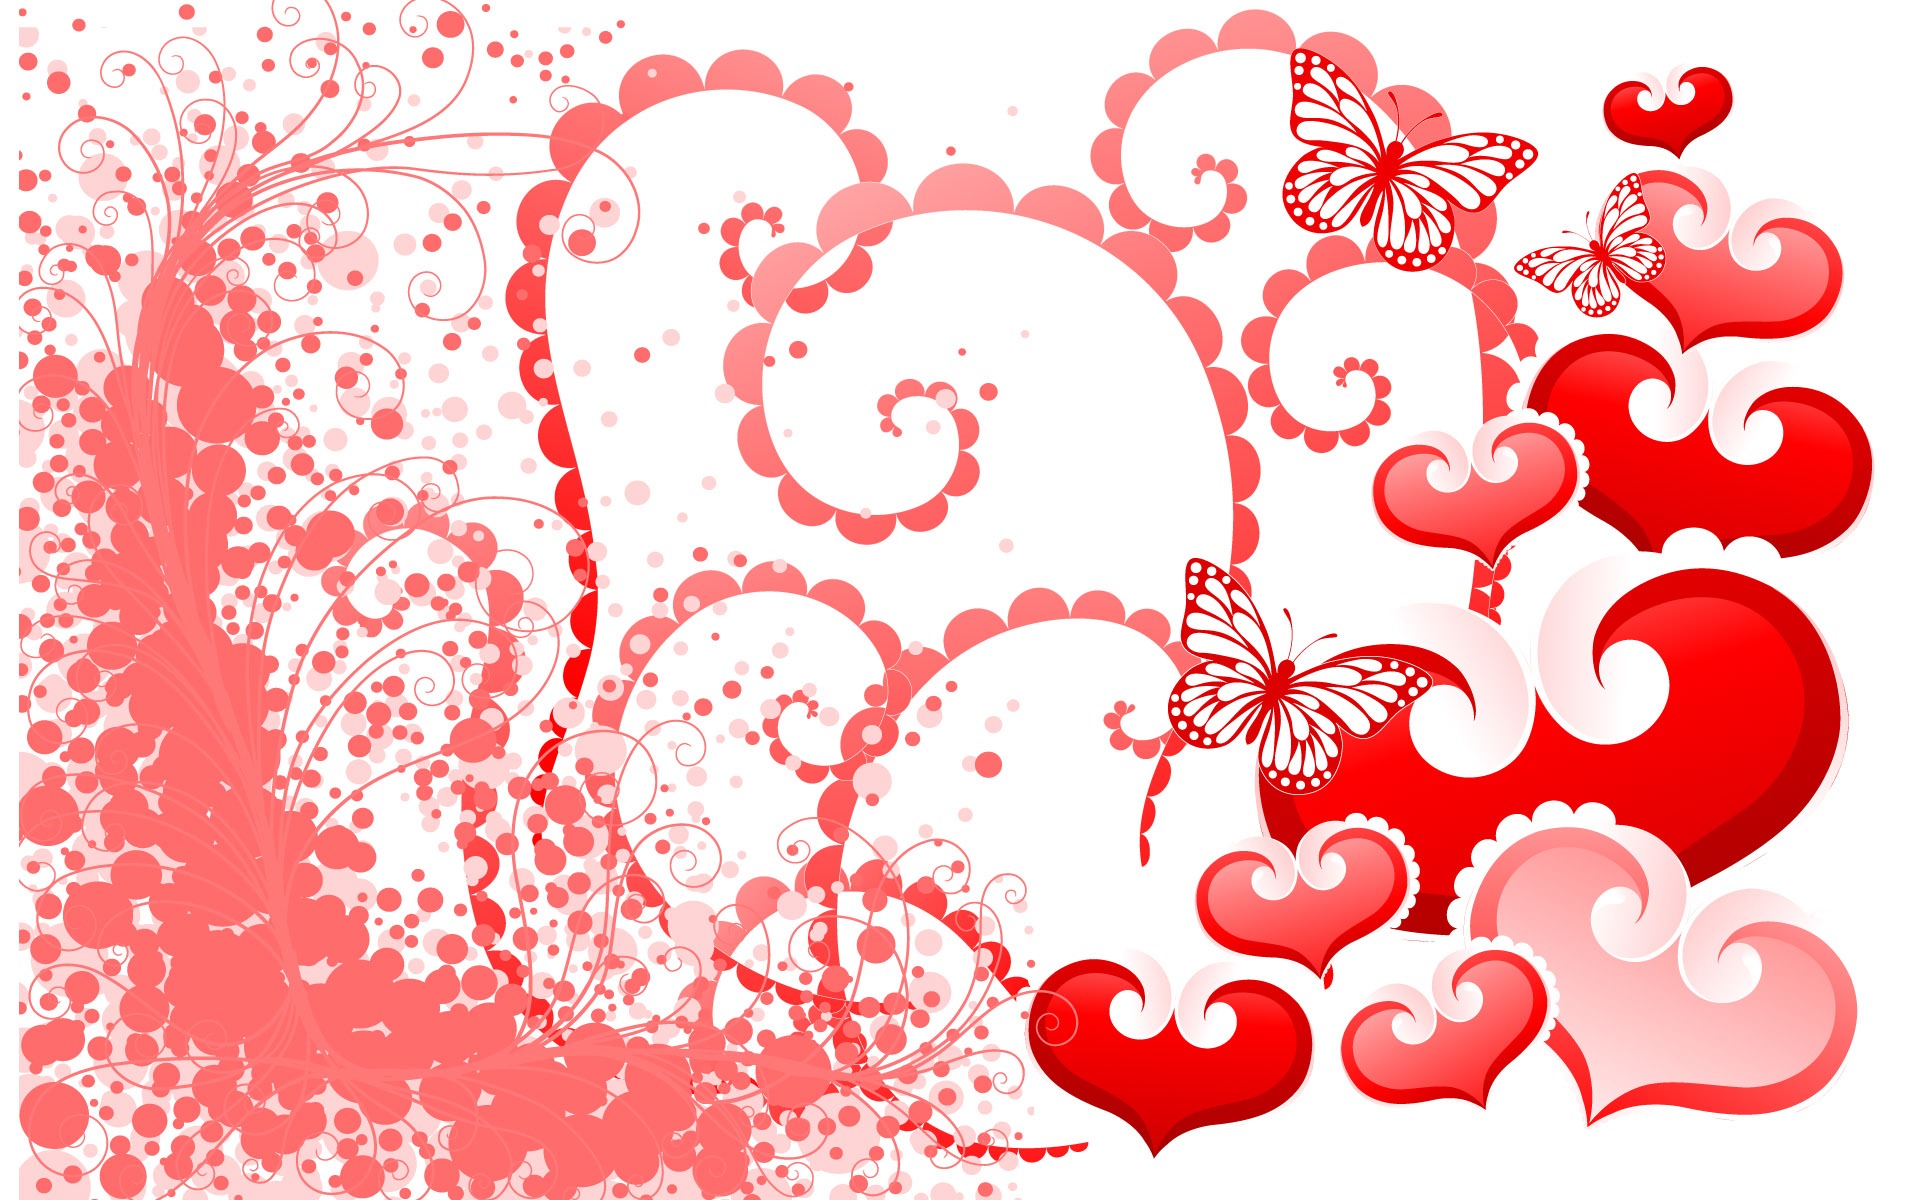 Valentine's Day Theme Wallpapers (6) #6 - 1920x1200